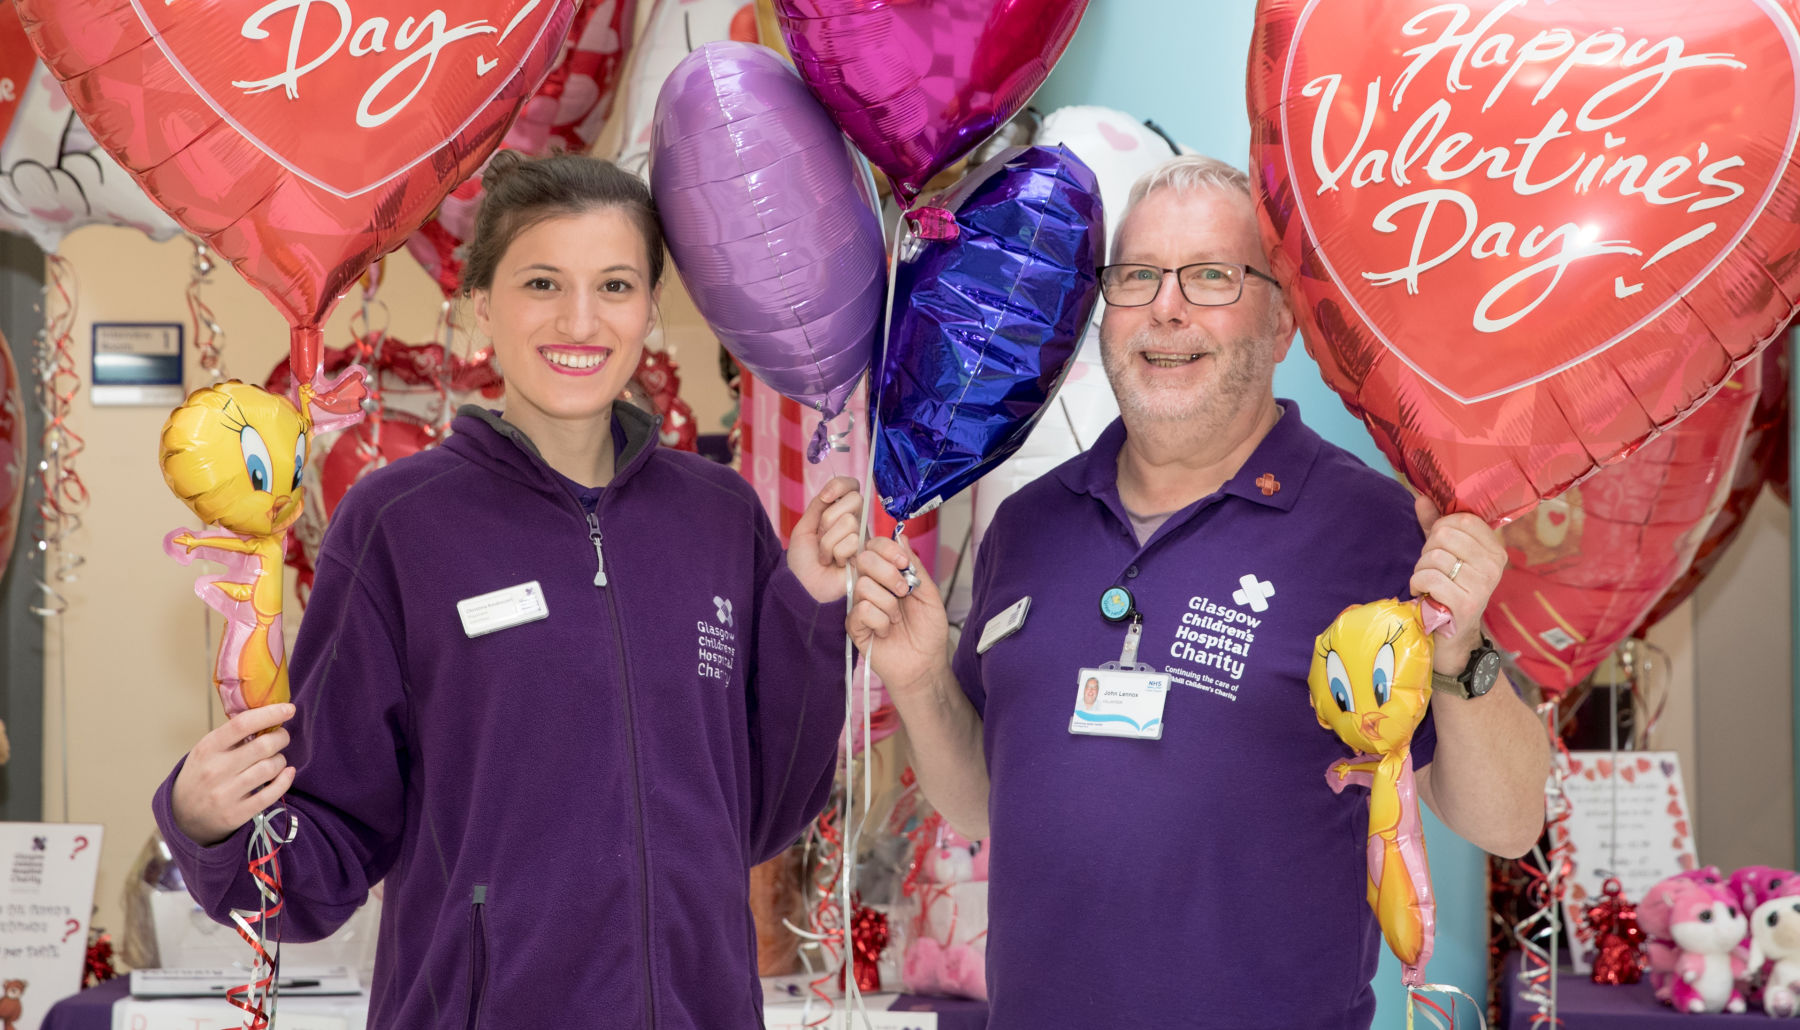 Two volunteers standing smiling at the camera holding large Valentines Day balloons